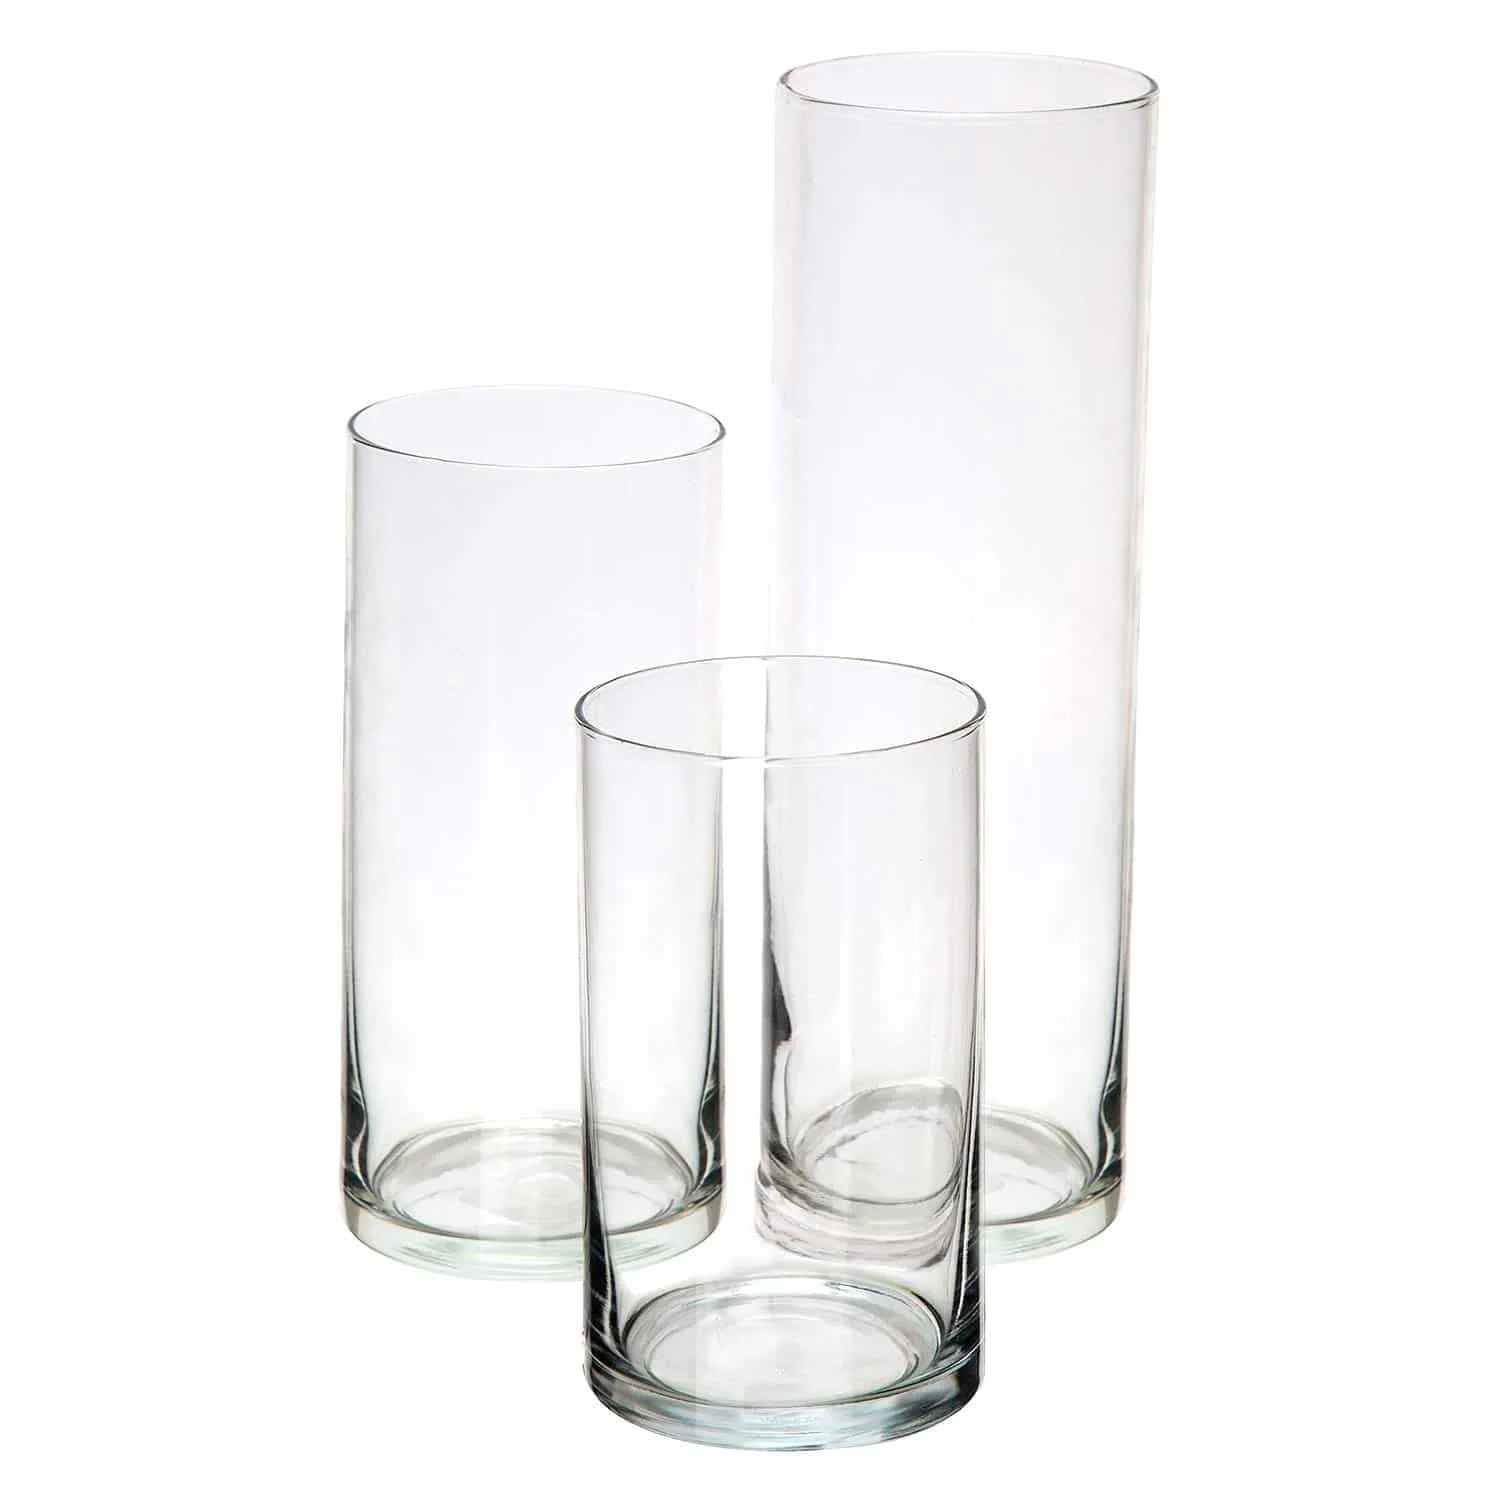 Italian Themed Dinner Party Glass Cylinder Vases